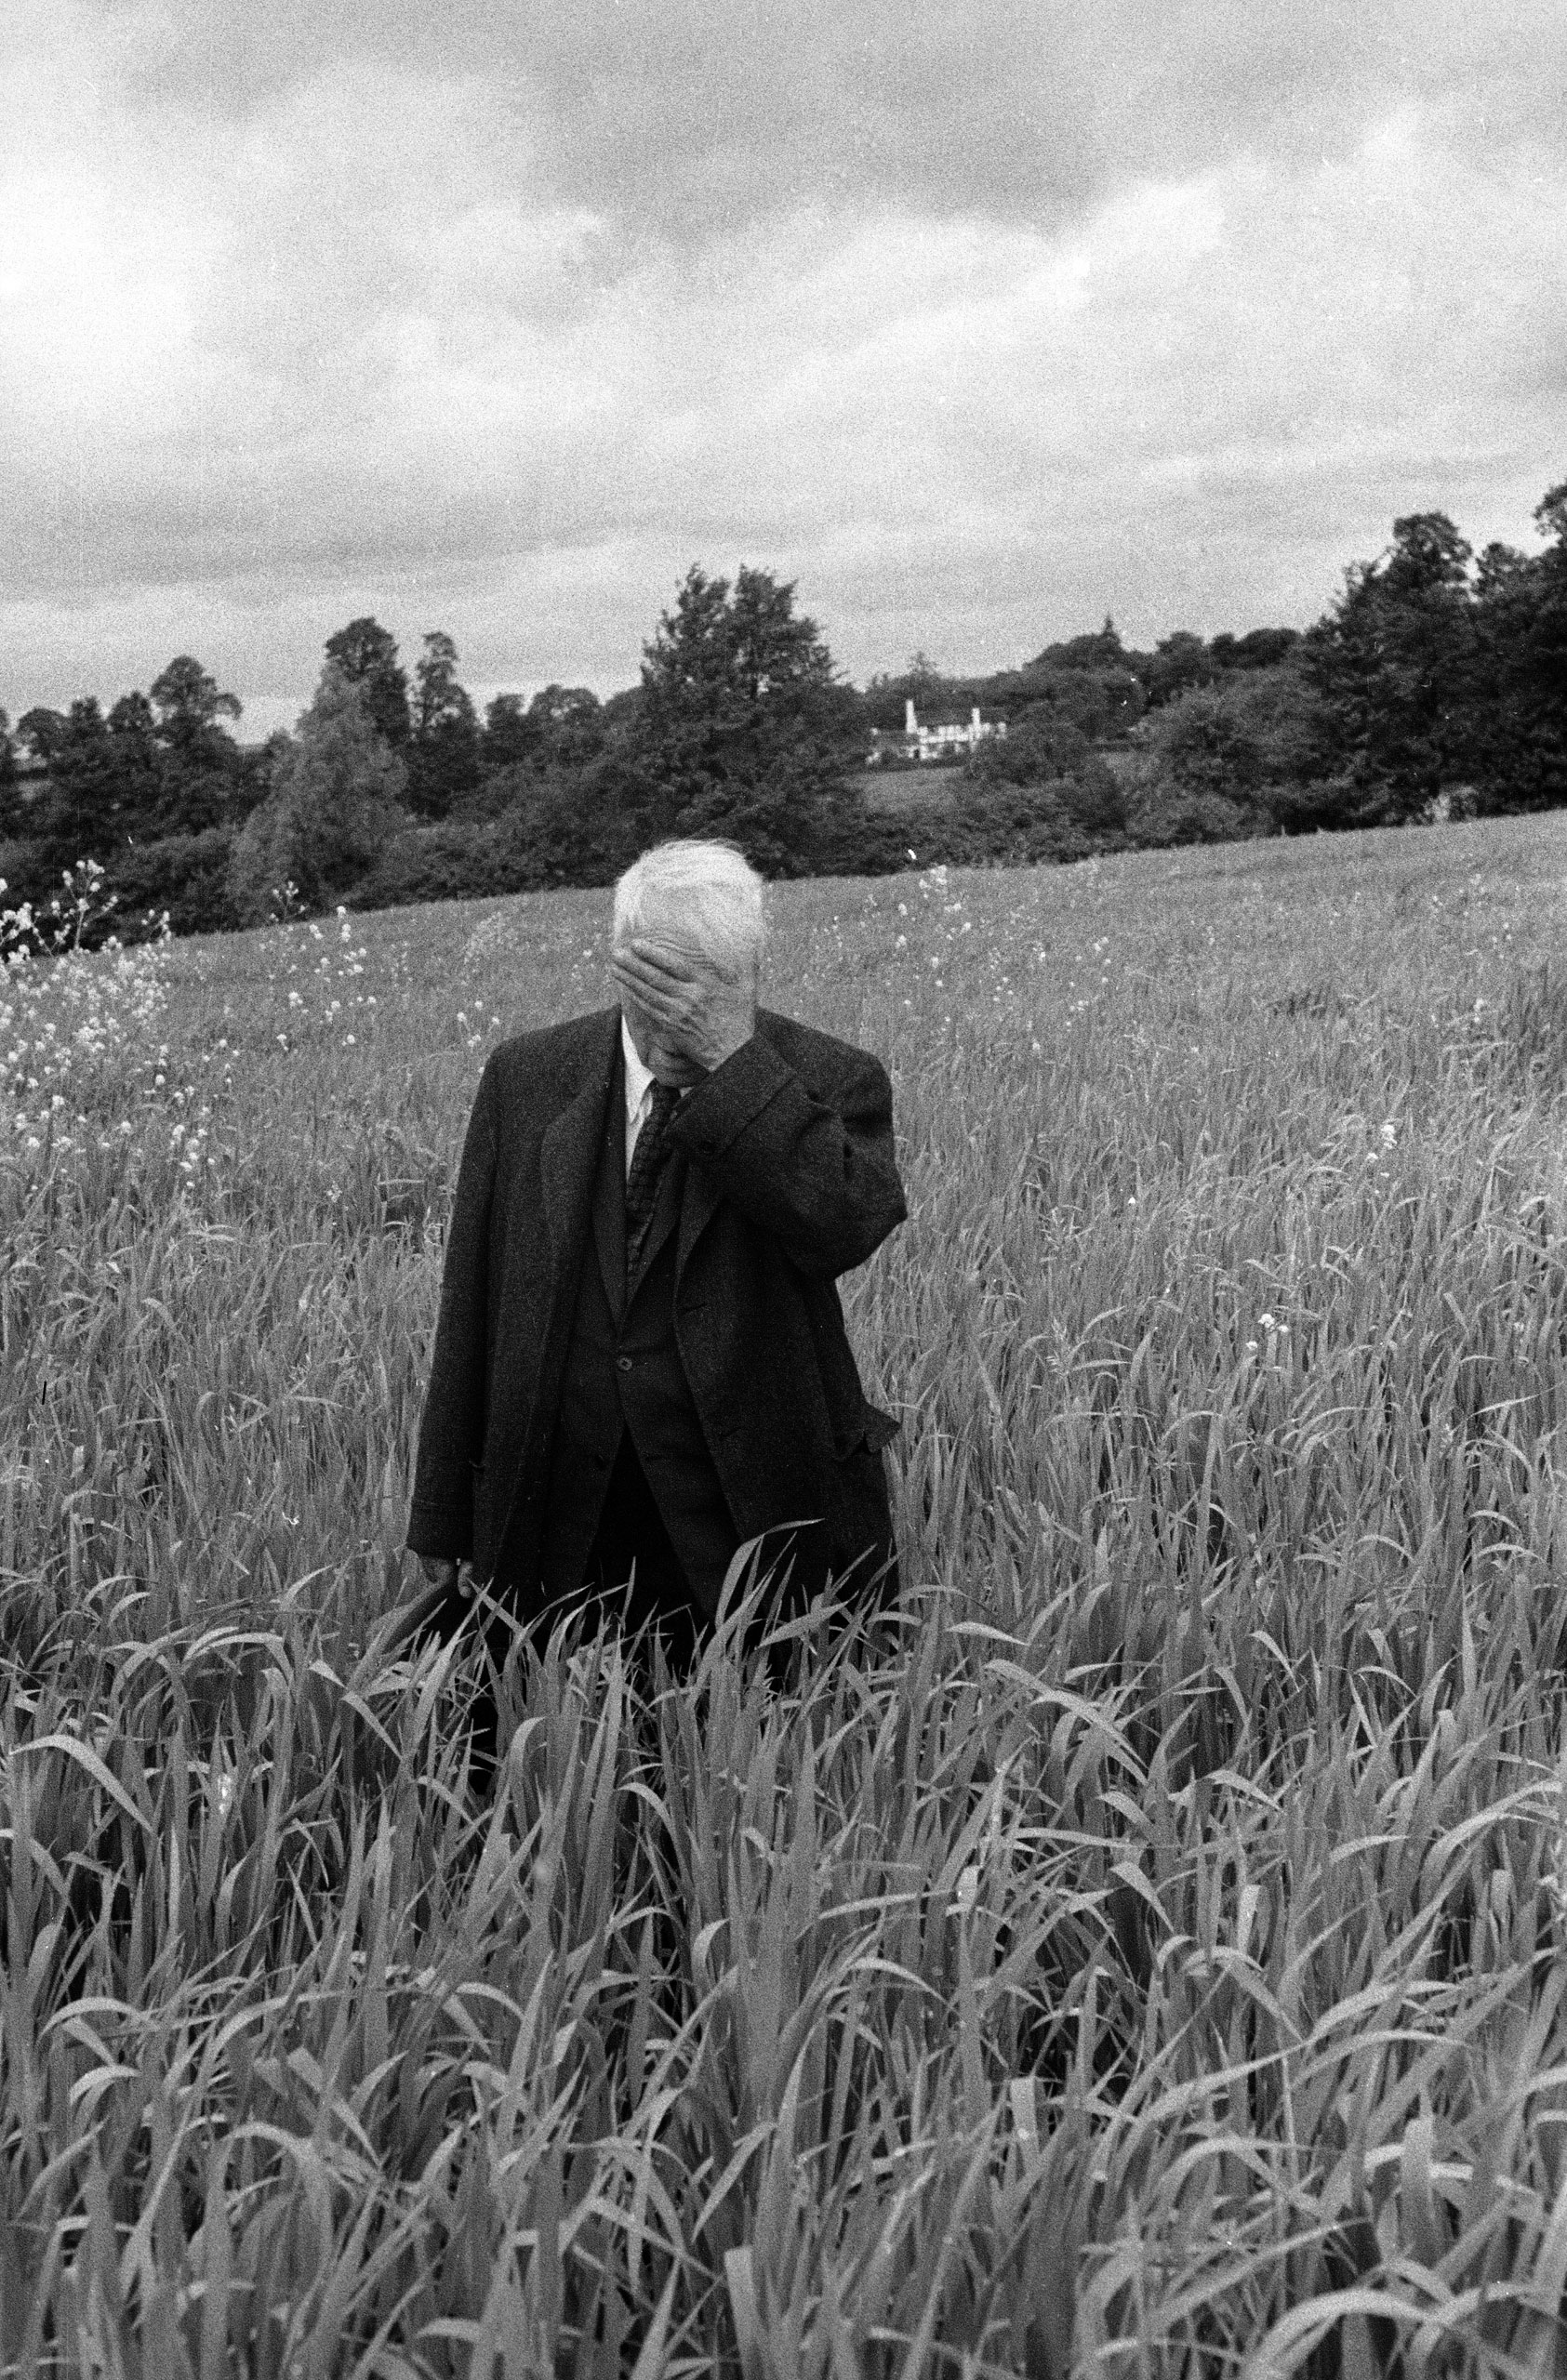 In an English field where 'Surging, the grasses dizzied me of thought' (from 'My Butterfly'), Mr. Frost recalls another day.